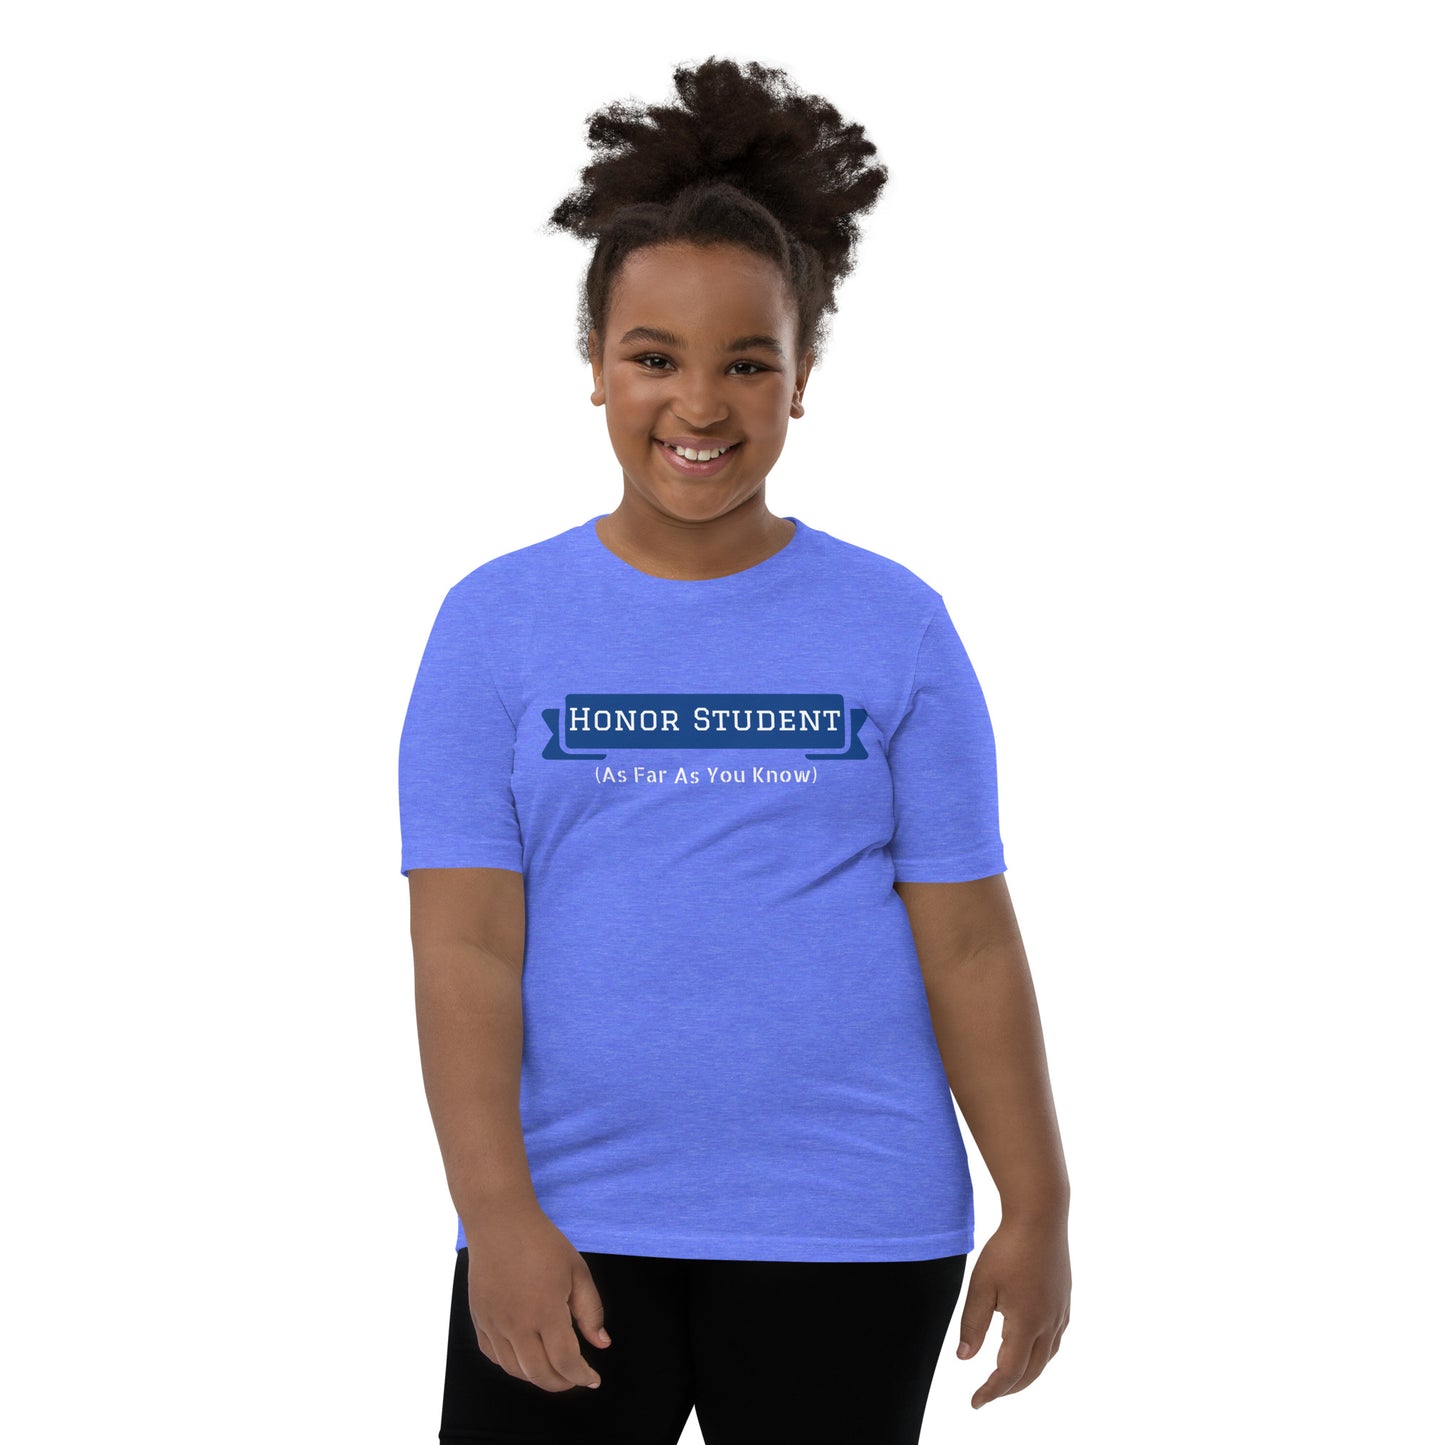 Honor Student (As far as you know) Youth Short Sleeve T-Shirt